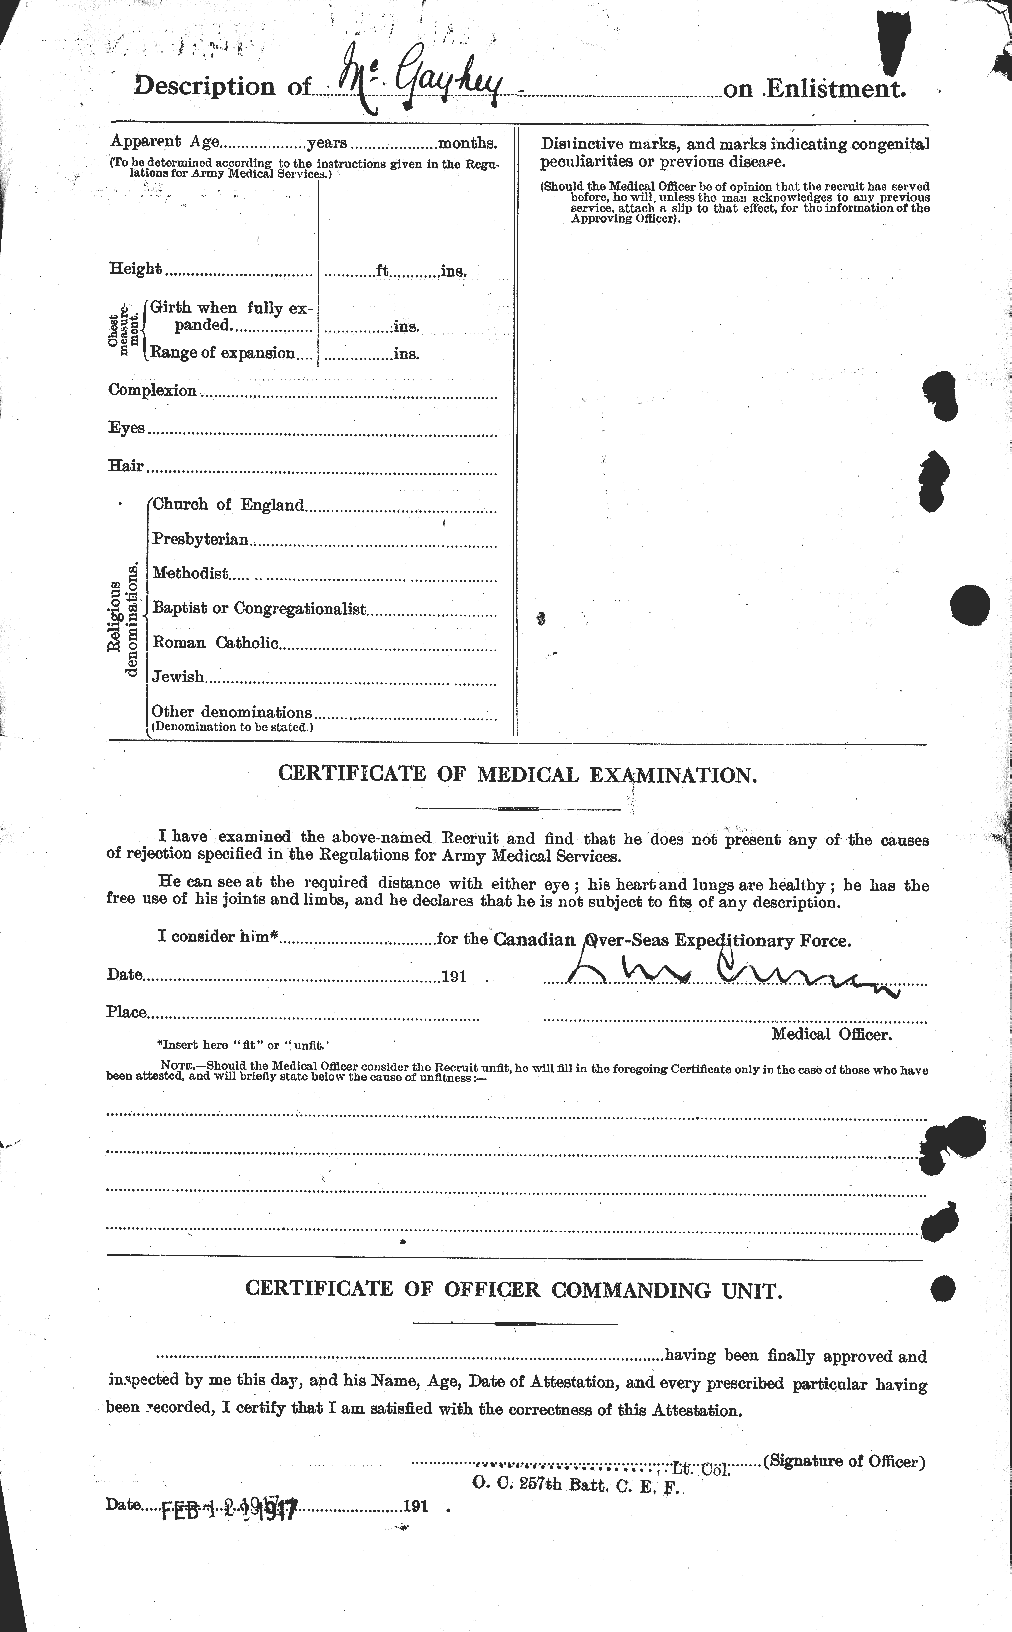 Personnel Records of the First World War - CEF 517064b